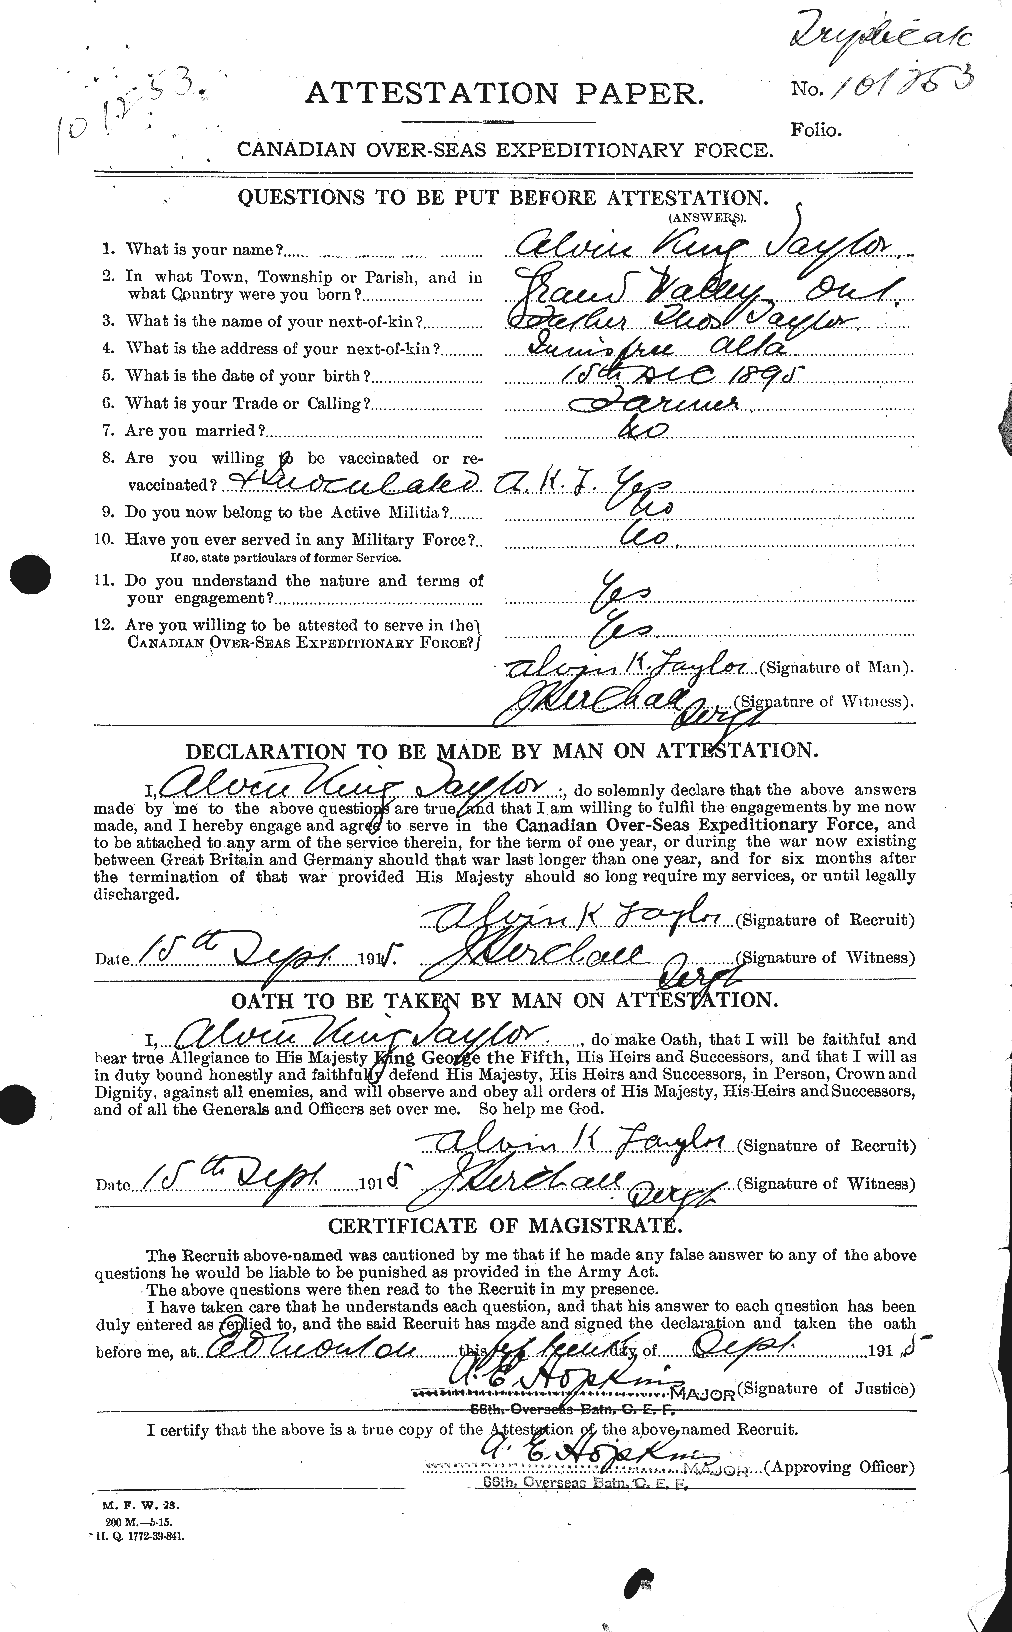 Personnel Records of the First World War - CEF 626215a